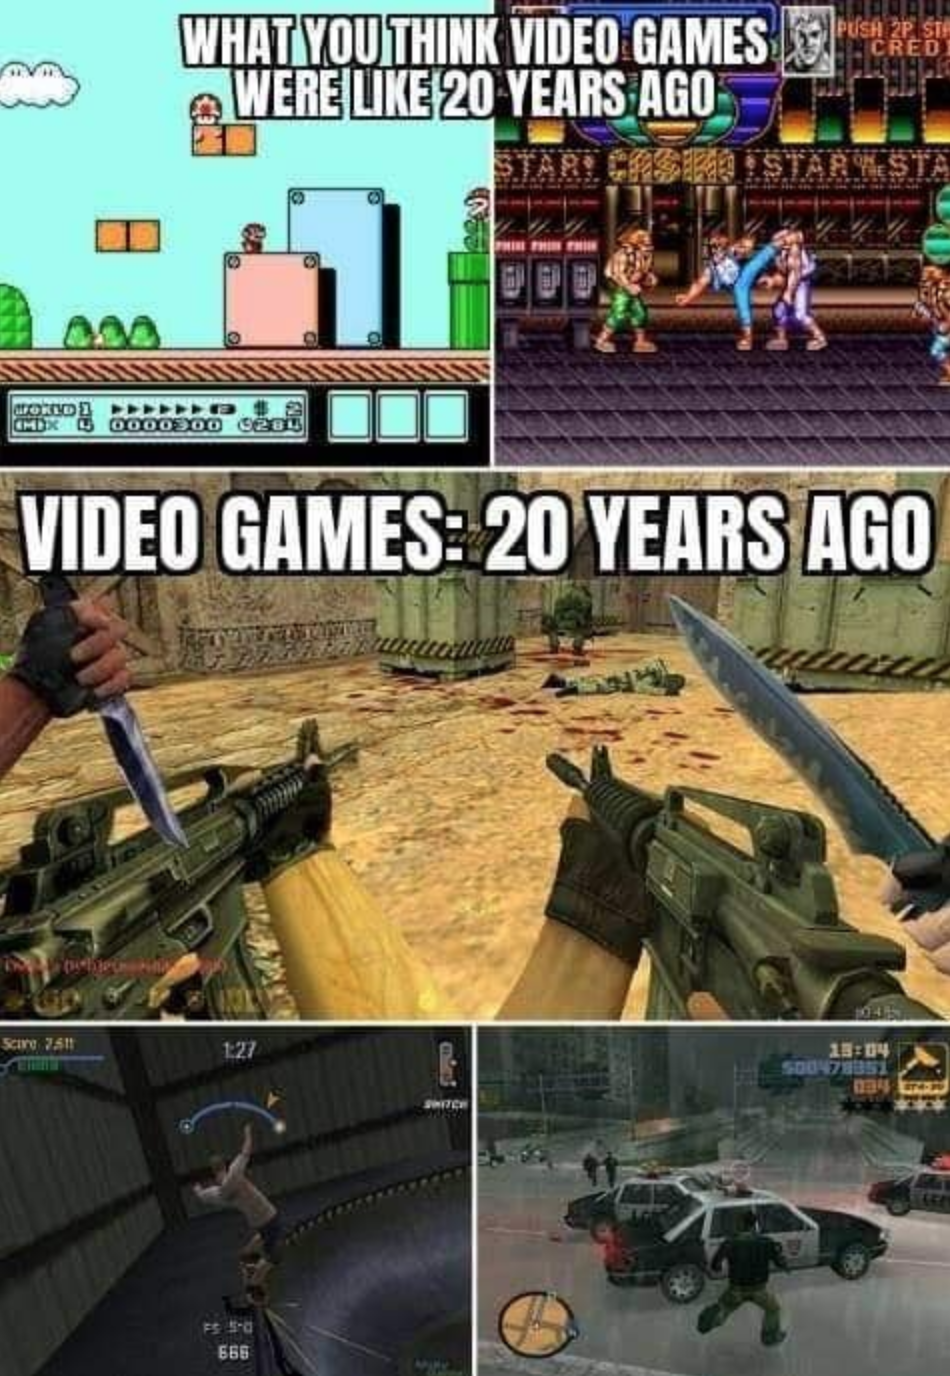 video game memes - Pes Creol What You Think Video Games Were 20 Years Ago Stari Cesto Istar Od Video Games 20 Years Ago 1818 Stest Ske